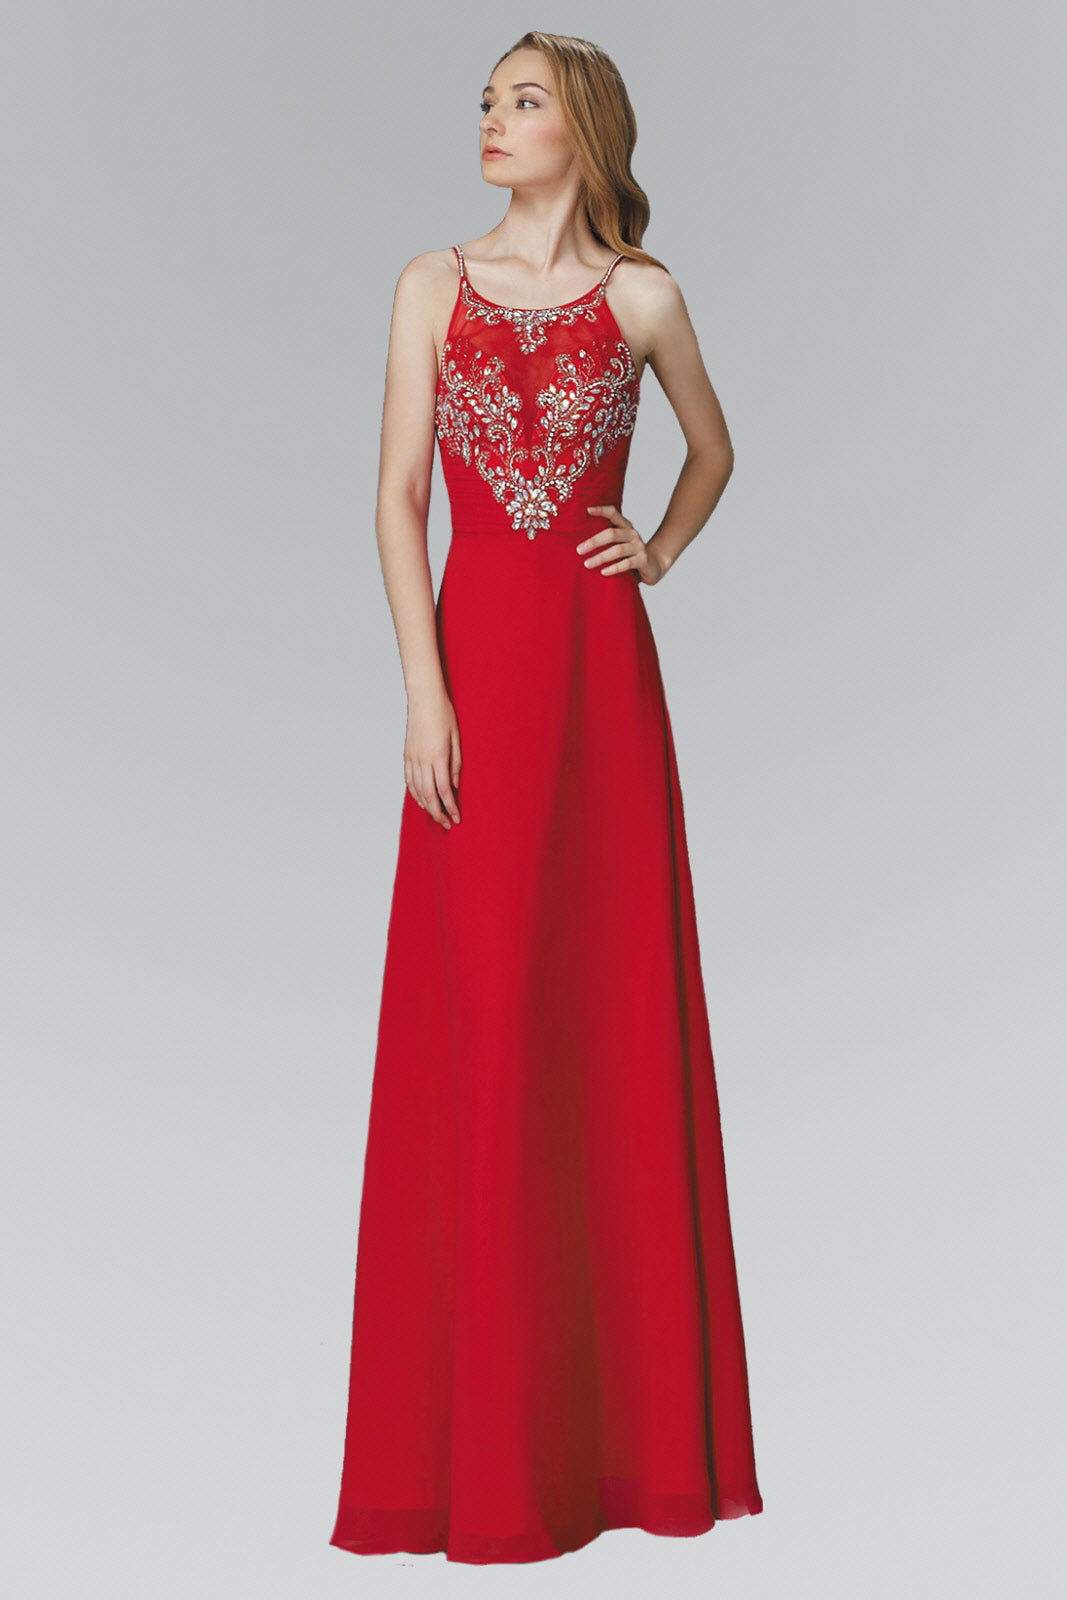 Spaghetti Straps Long Chiffon Dress Accented with Bead and Jewel GLGL2027 Elsy Style PROM